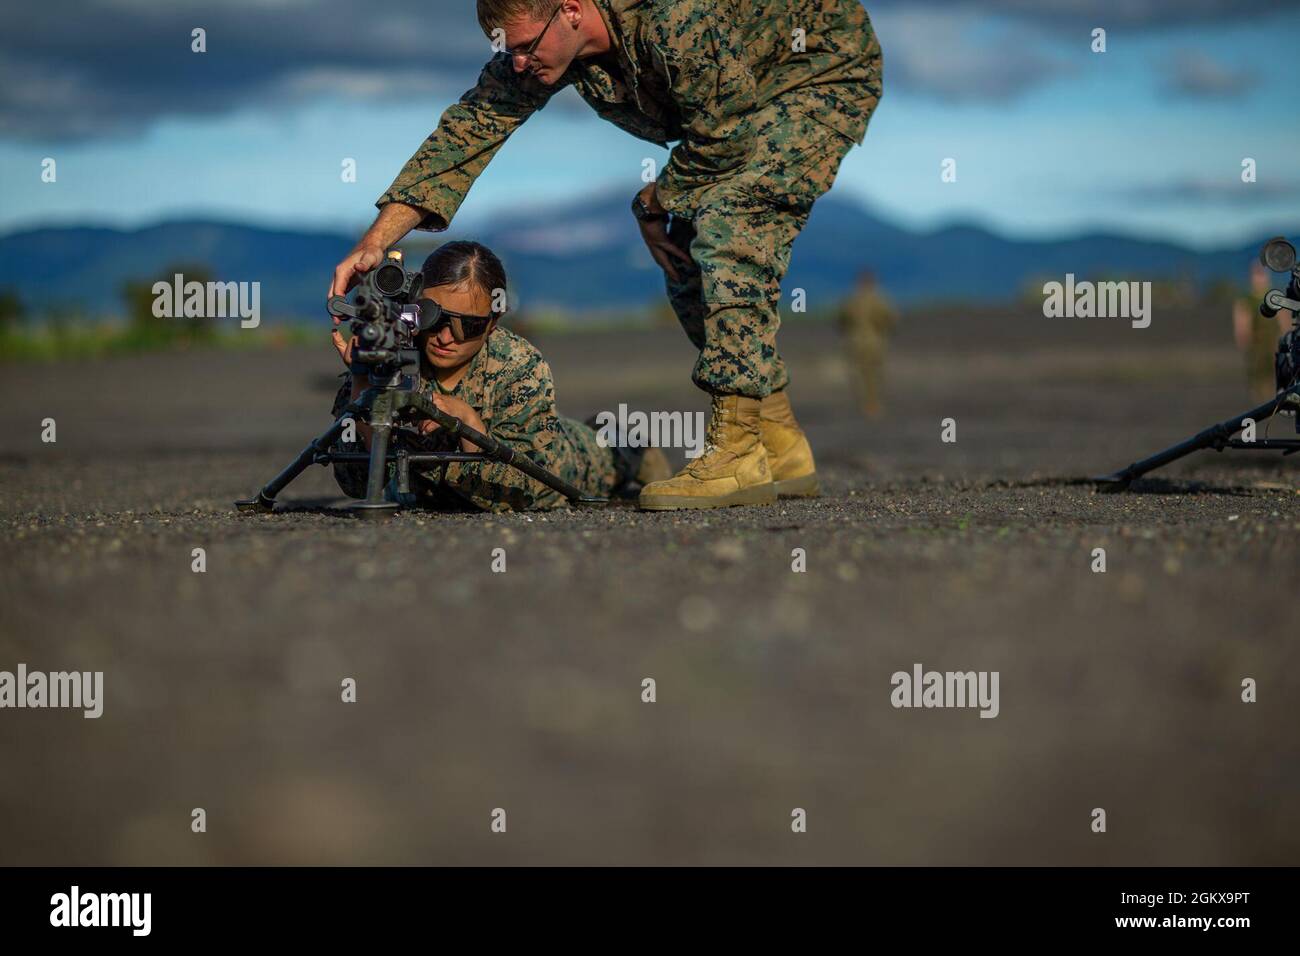 U.S. Marines with Marine Wing Support Squadron (MWSS) 171, familiarize themselves with an M240B machine gun during exercise Eagle Wrath 21 at Combined Arms Training Center (CATC) Camp Fuji, Japan, July 16, 2021. Eagle Wrath is an annual MWSS-171 exercise at CATC Camp Fuji, Japan, designed to increase squadron proficiency in conducting real-world contingency missions while in a forward operating environment. Stock Photo